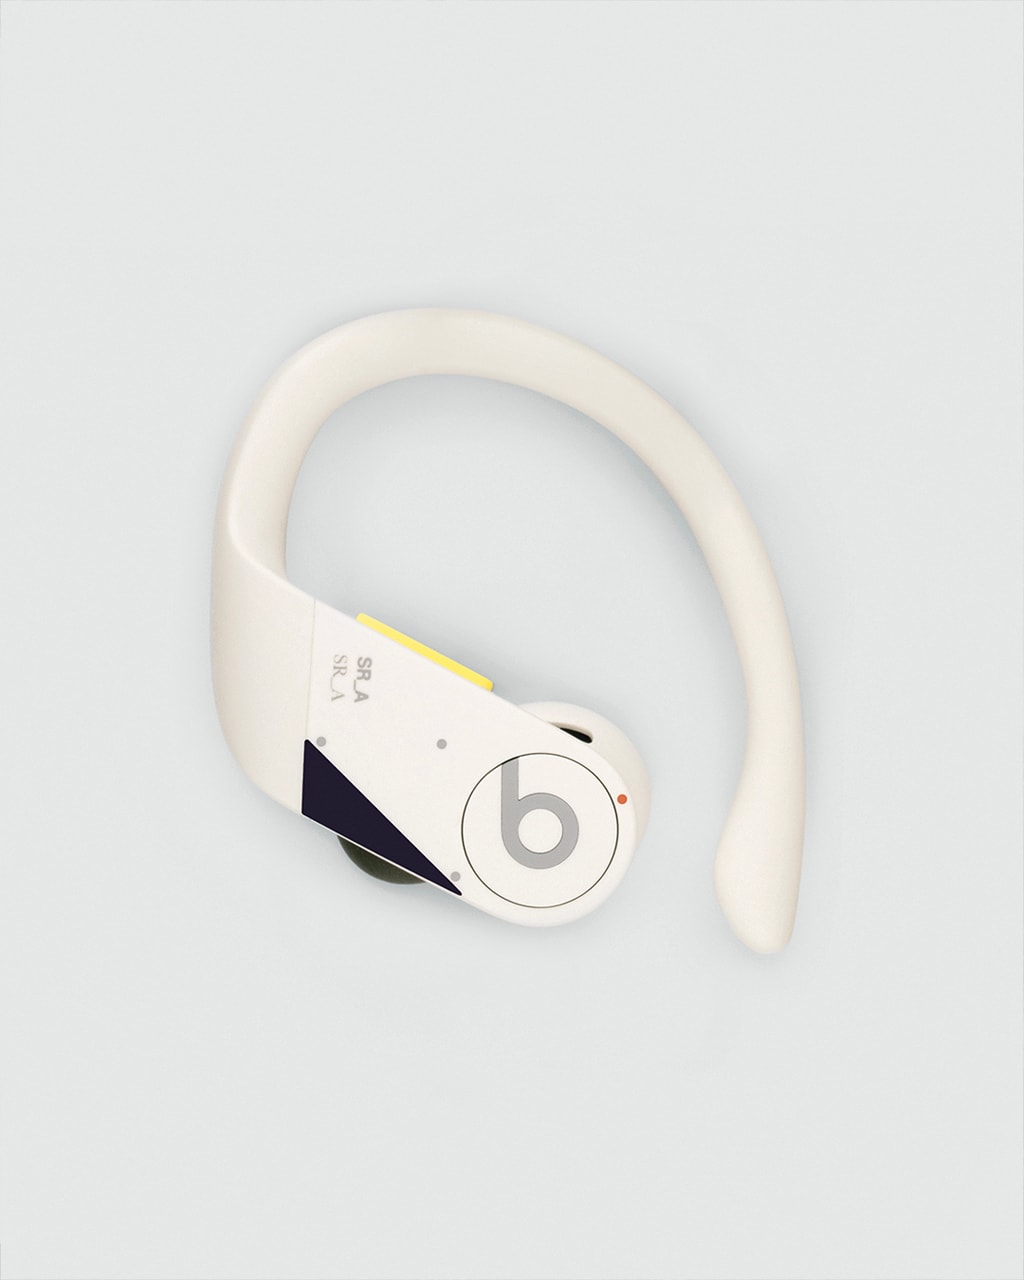 Samuel Ross SR_A and Beats by Dr. Dre Have Teamed Up Again for Custom Powerbeats Pro Earbuds